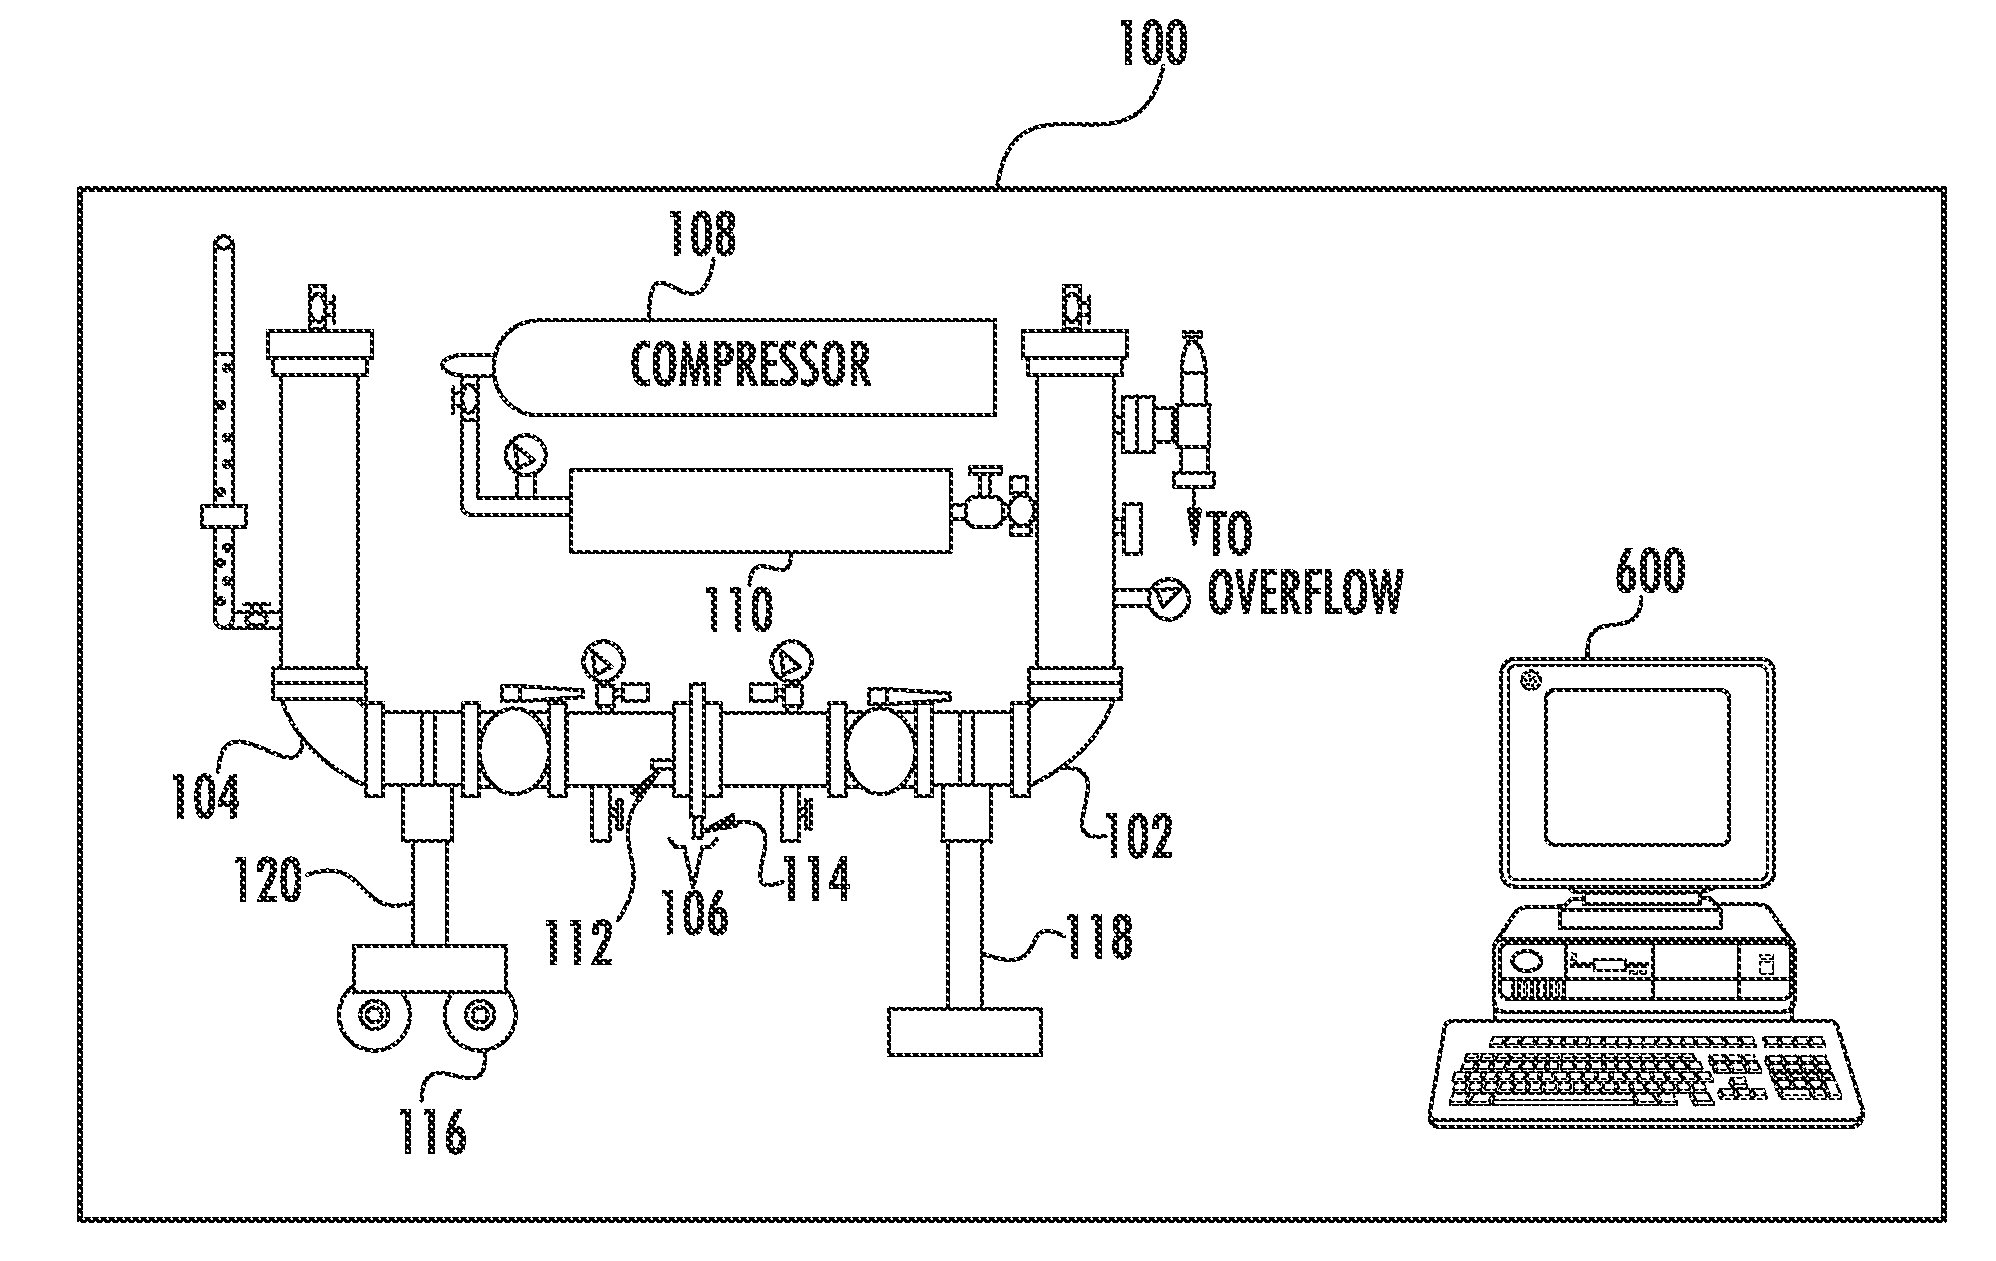 Systems and methods for determining a leak rate through an opening using acoustical sensors